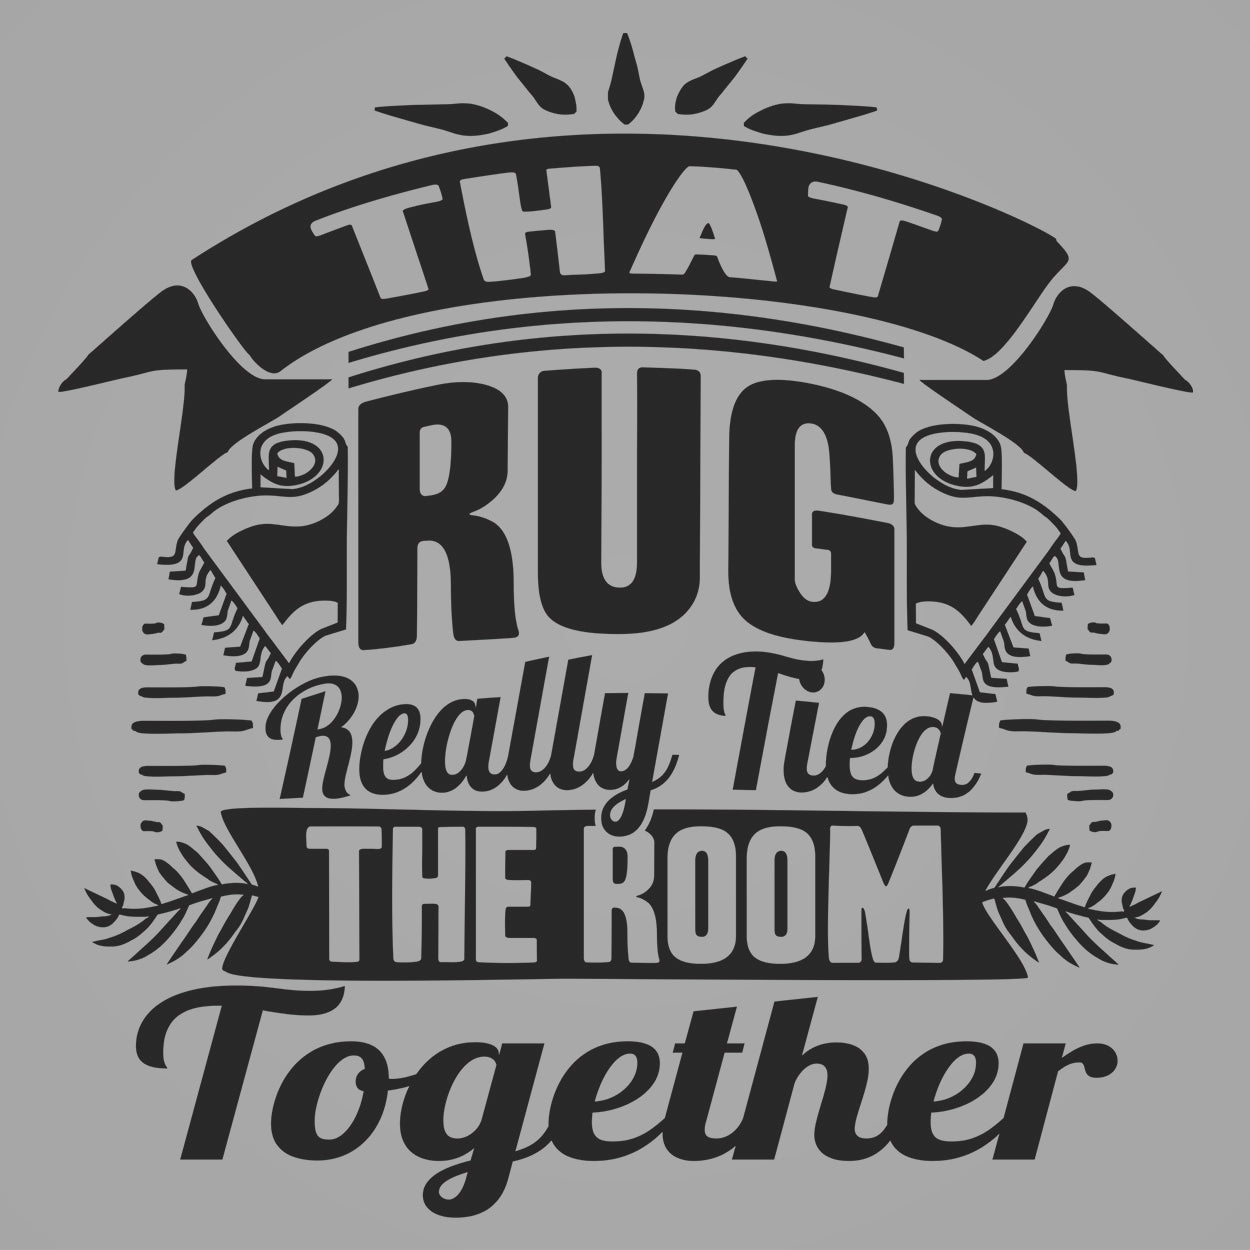 Really Tied The Room Together Tshirt - Donkey Tees